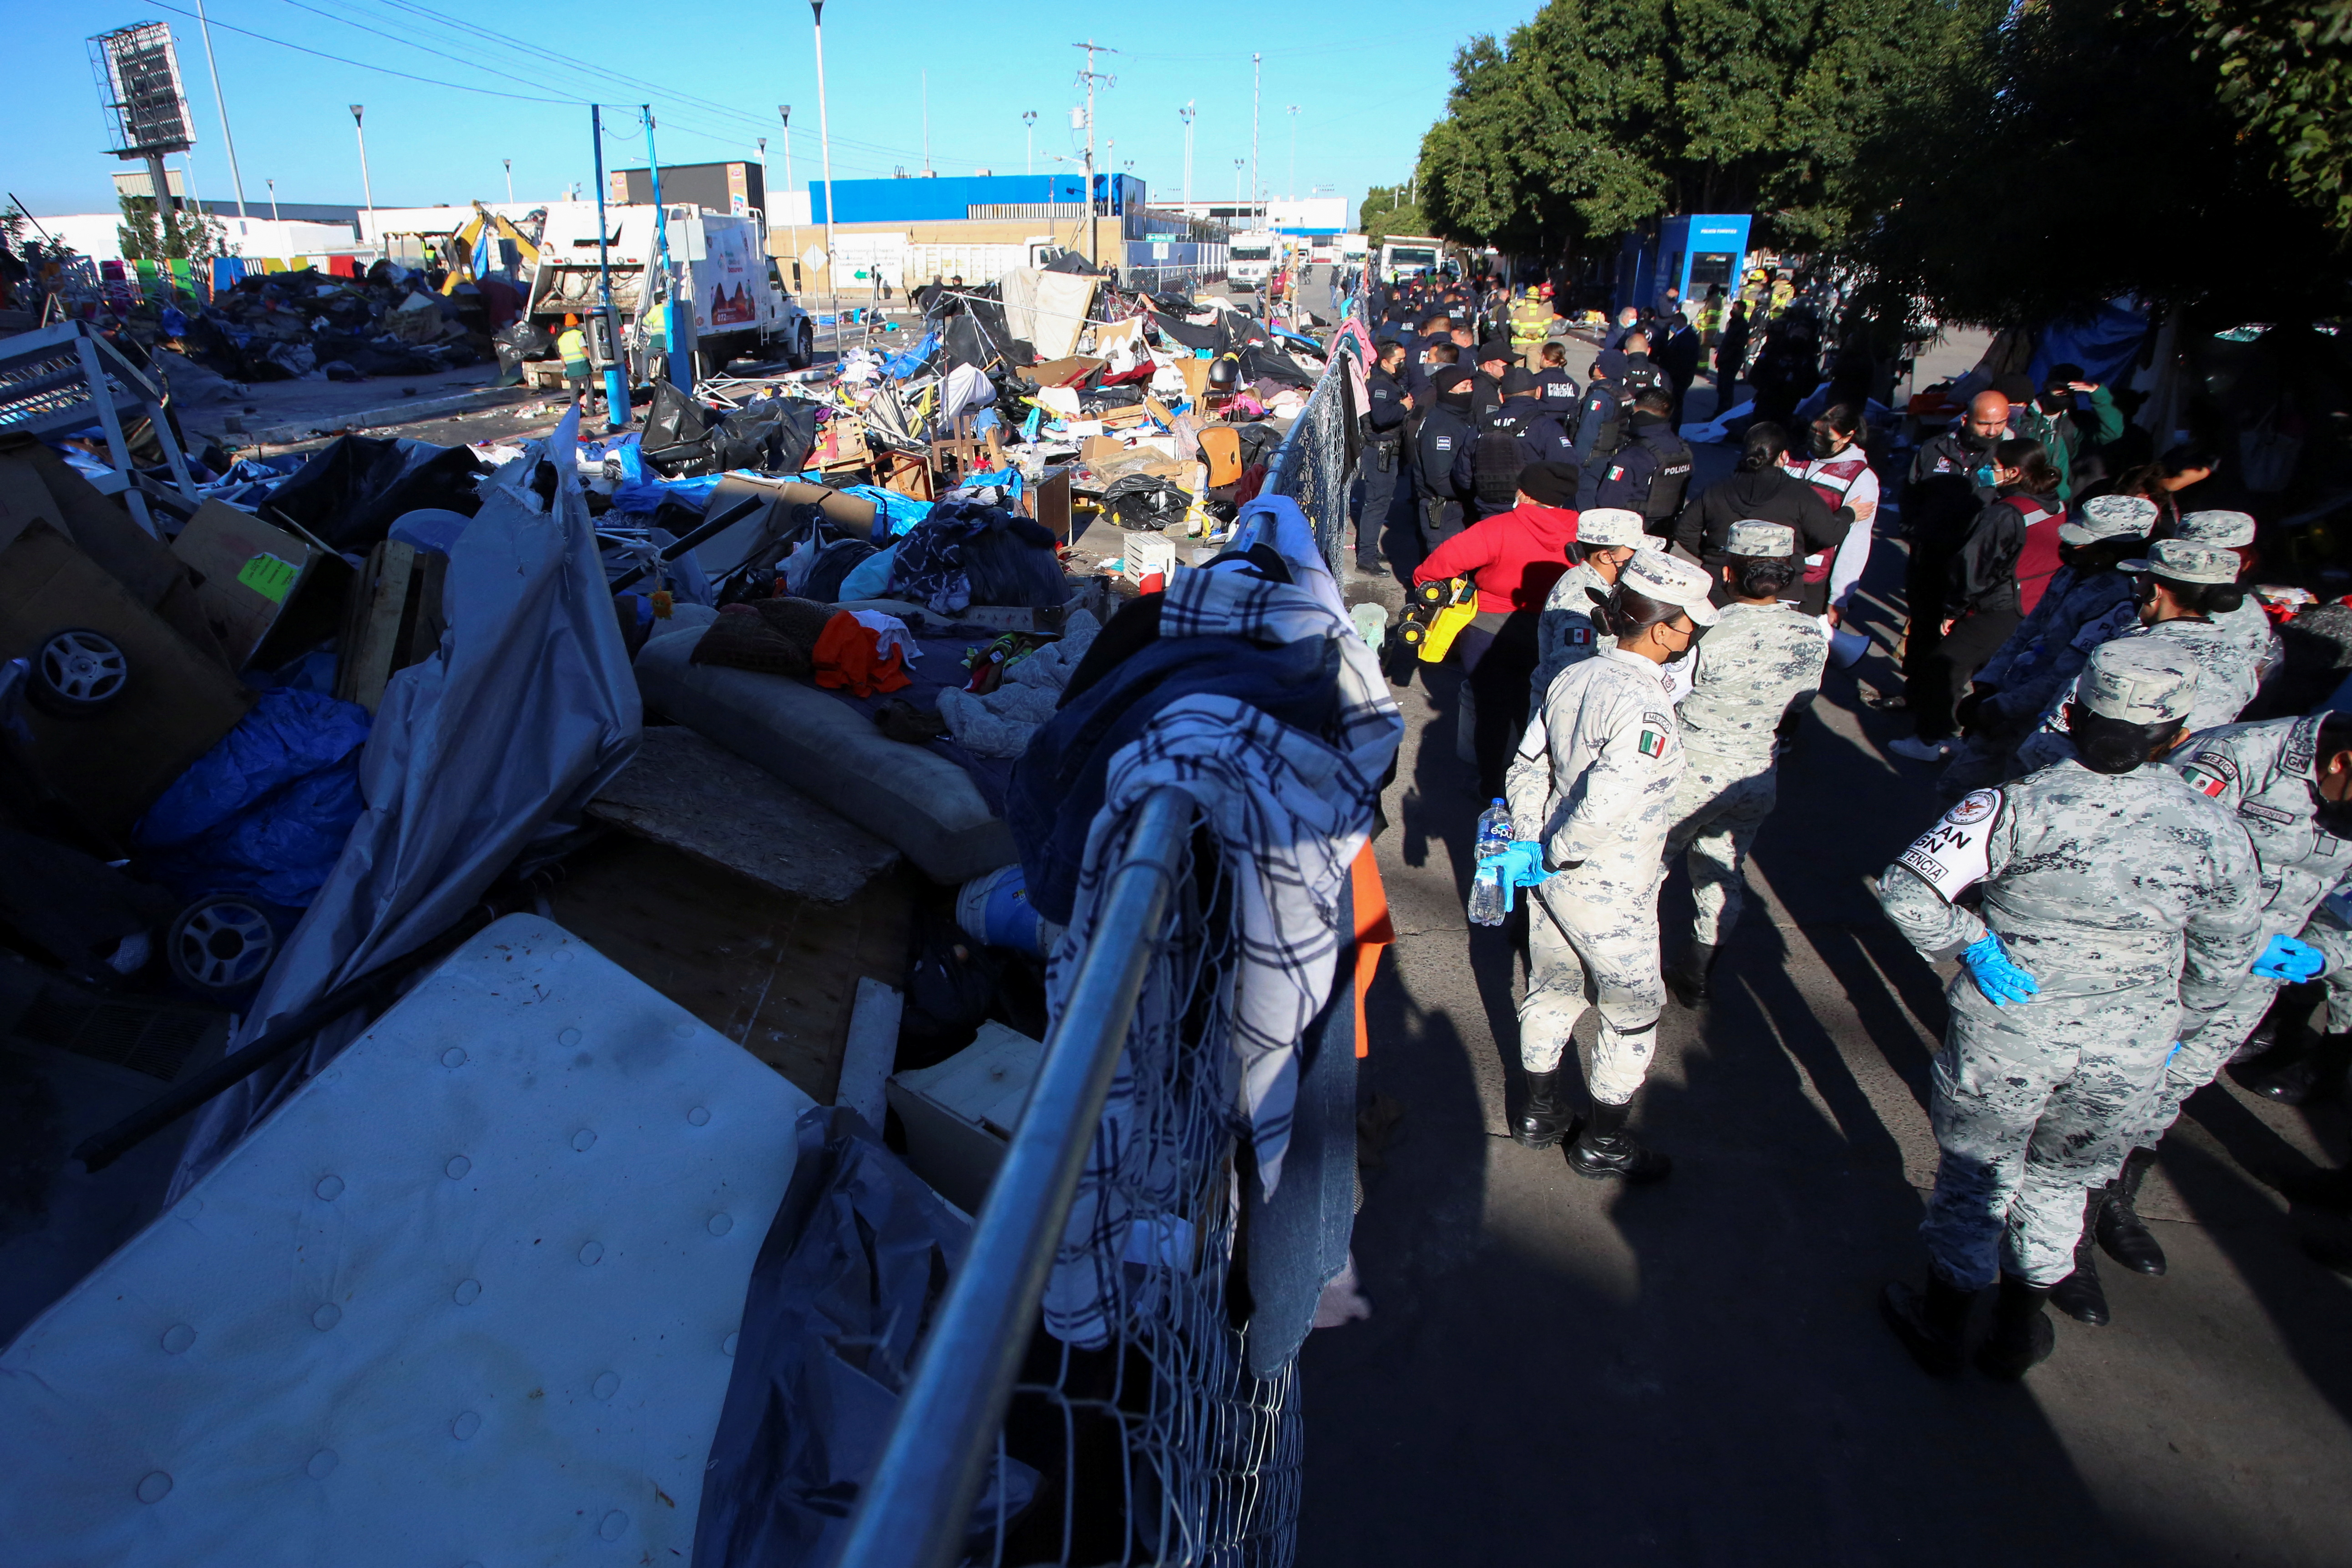 Soldiers keep watch next to belongings of migrants after Mexican authorities cleared a makeshift camp, where hundreds of migrants heading towards the U.S. border were staying, at the El Chaparral border crossing in Tijuana, Mexico, February 6, 2022. REUTERS/Jorge Duenes